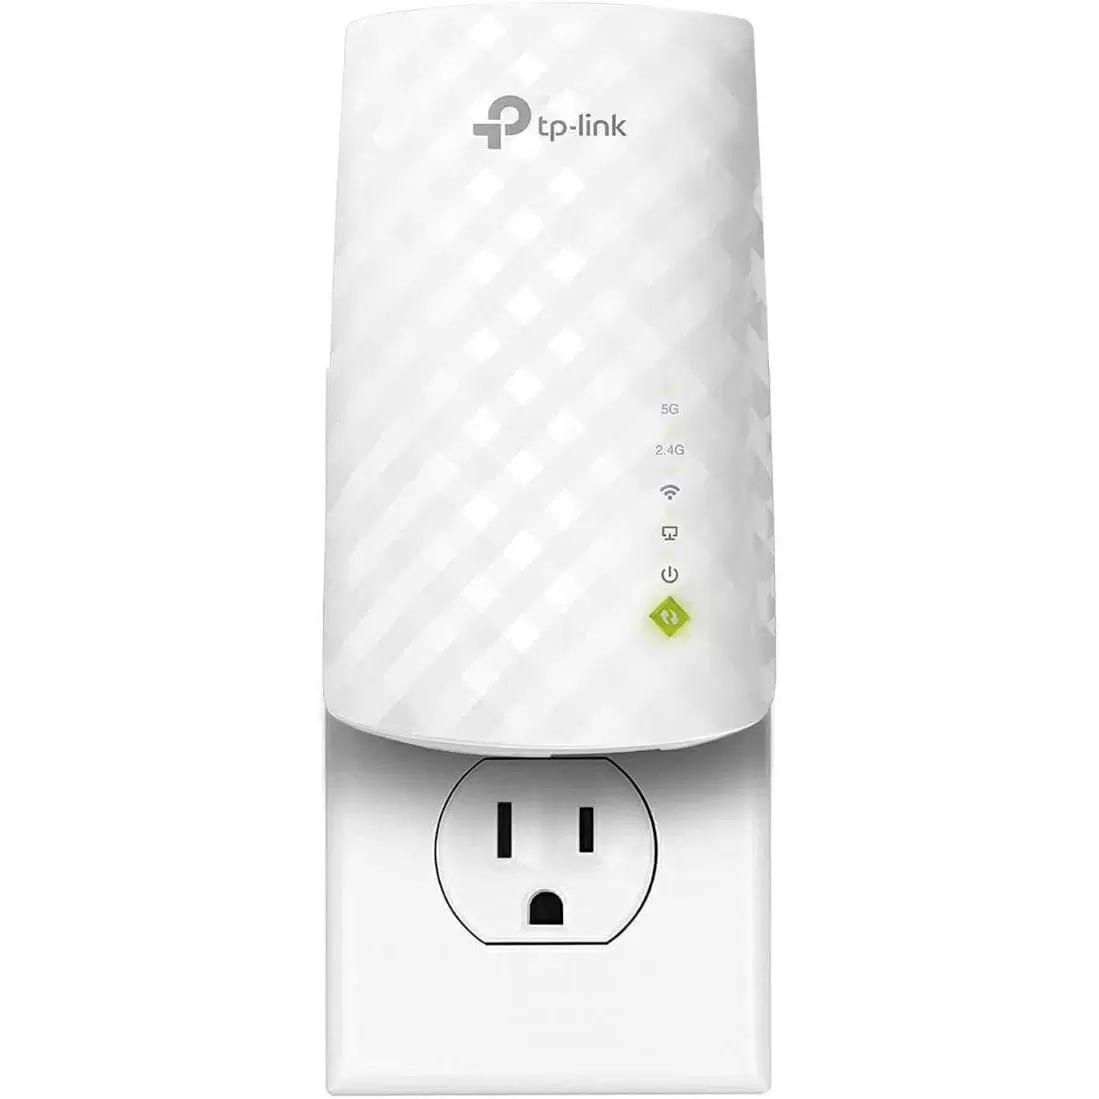 TP-Link WiFi Extender with Ethernet Port for $12.99